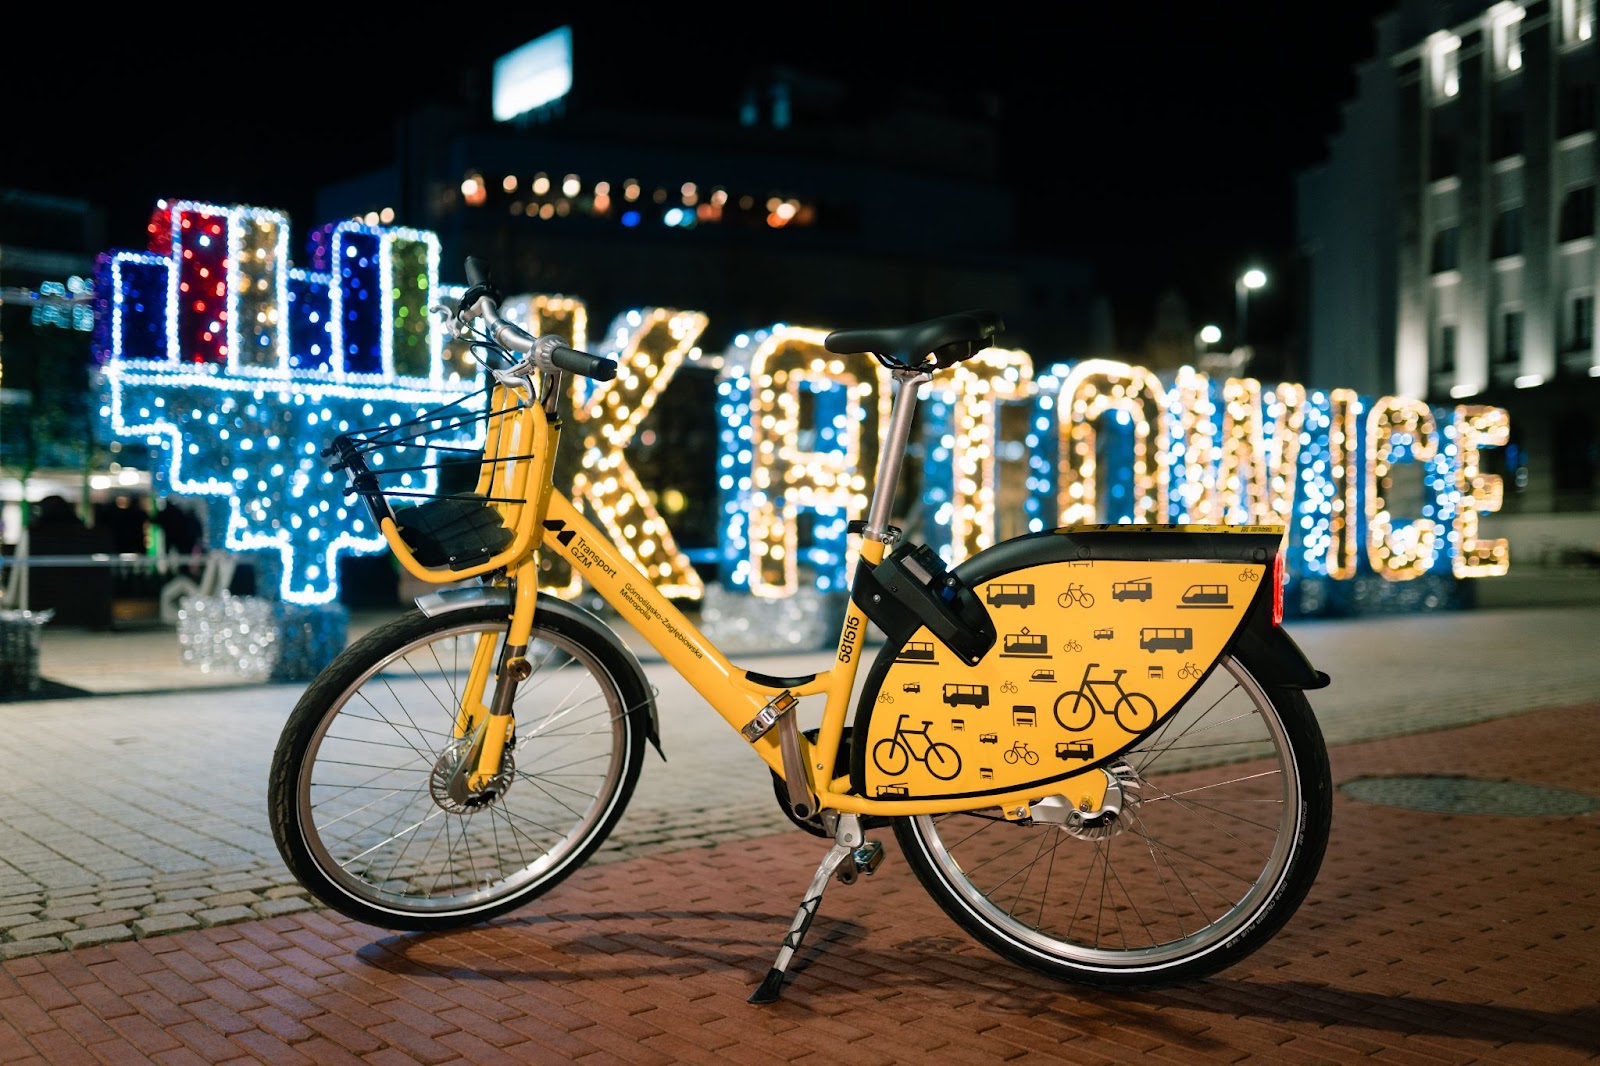 nextbike launches one of Poland’s largest bike share systems